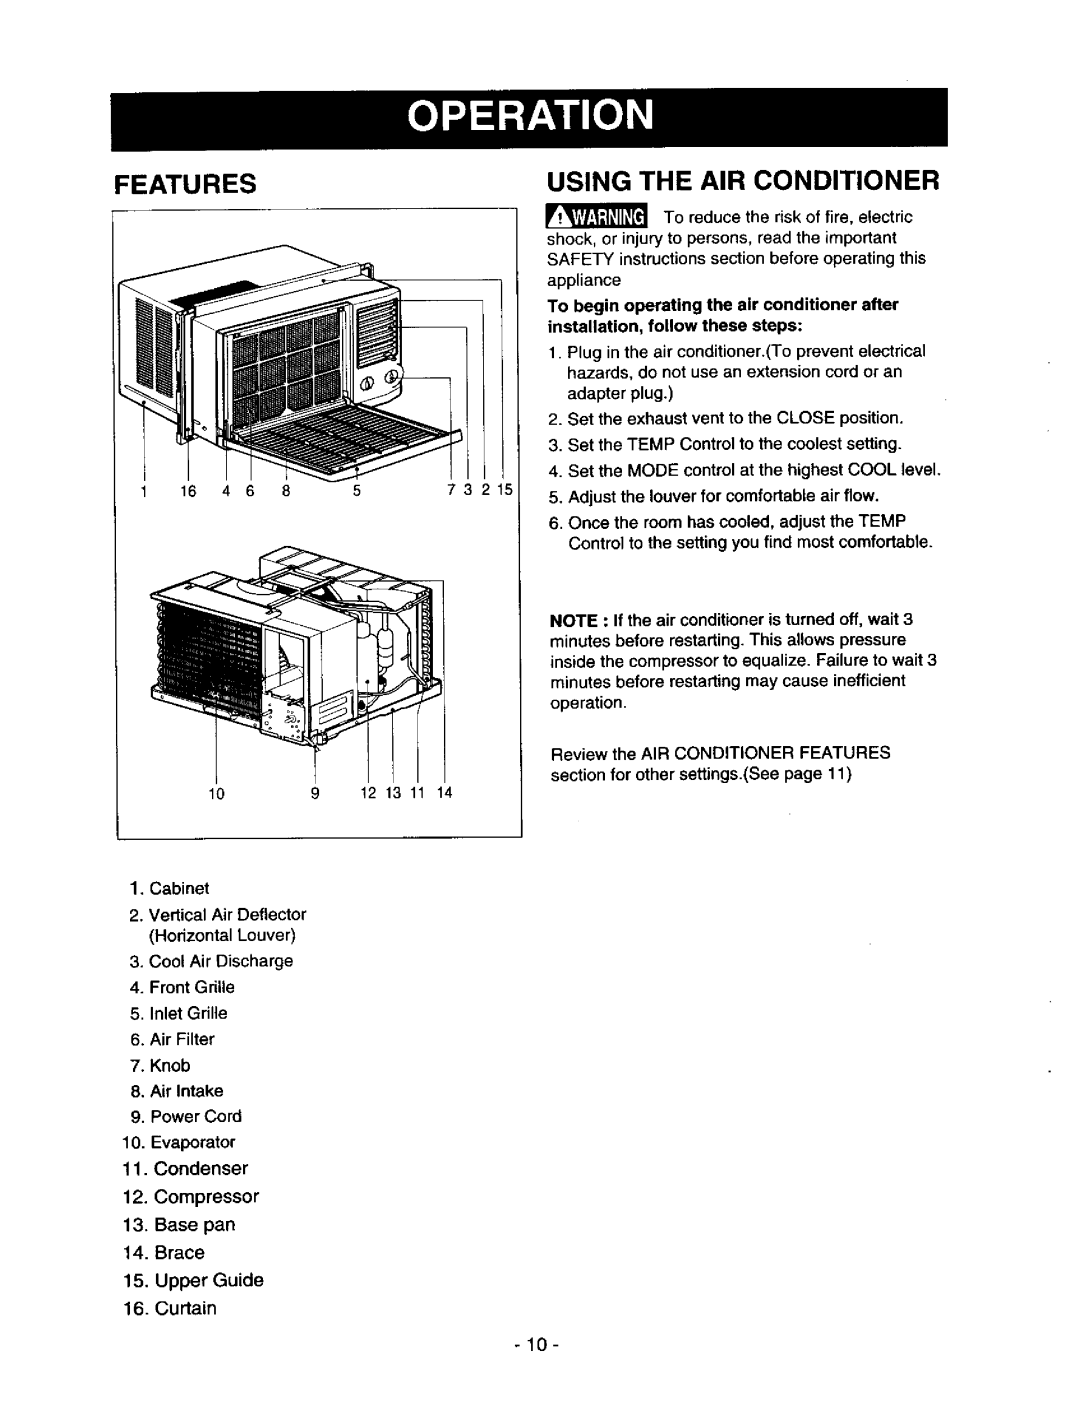 Kenmore 78122 owner manual Features, Using The Air Conditioner 